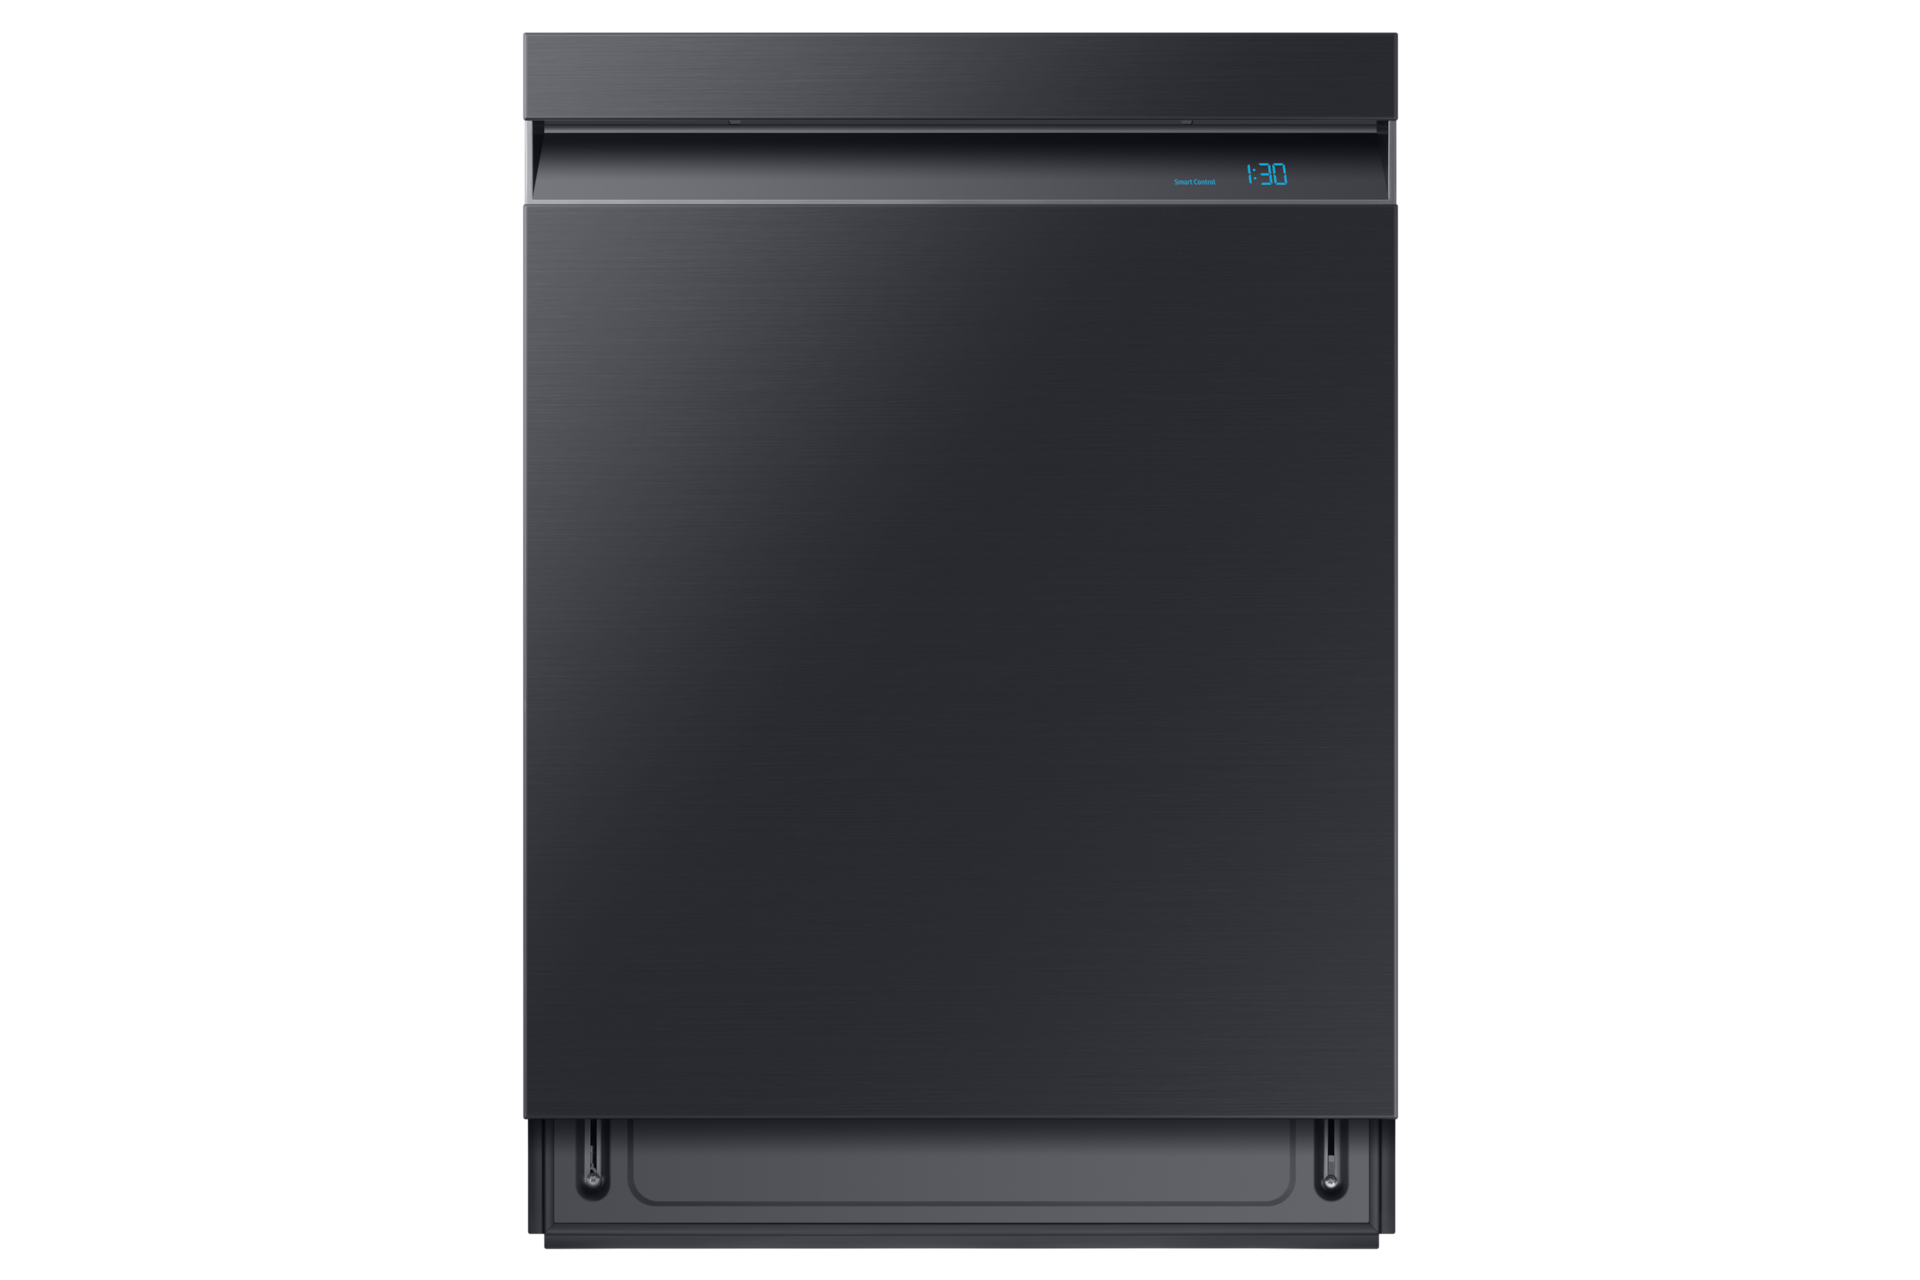 Image of Samsung Smart Linear Wash 39 dBA Dishwasher with 3rd Rack